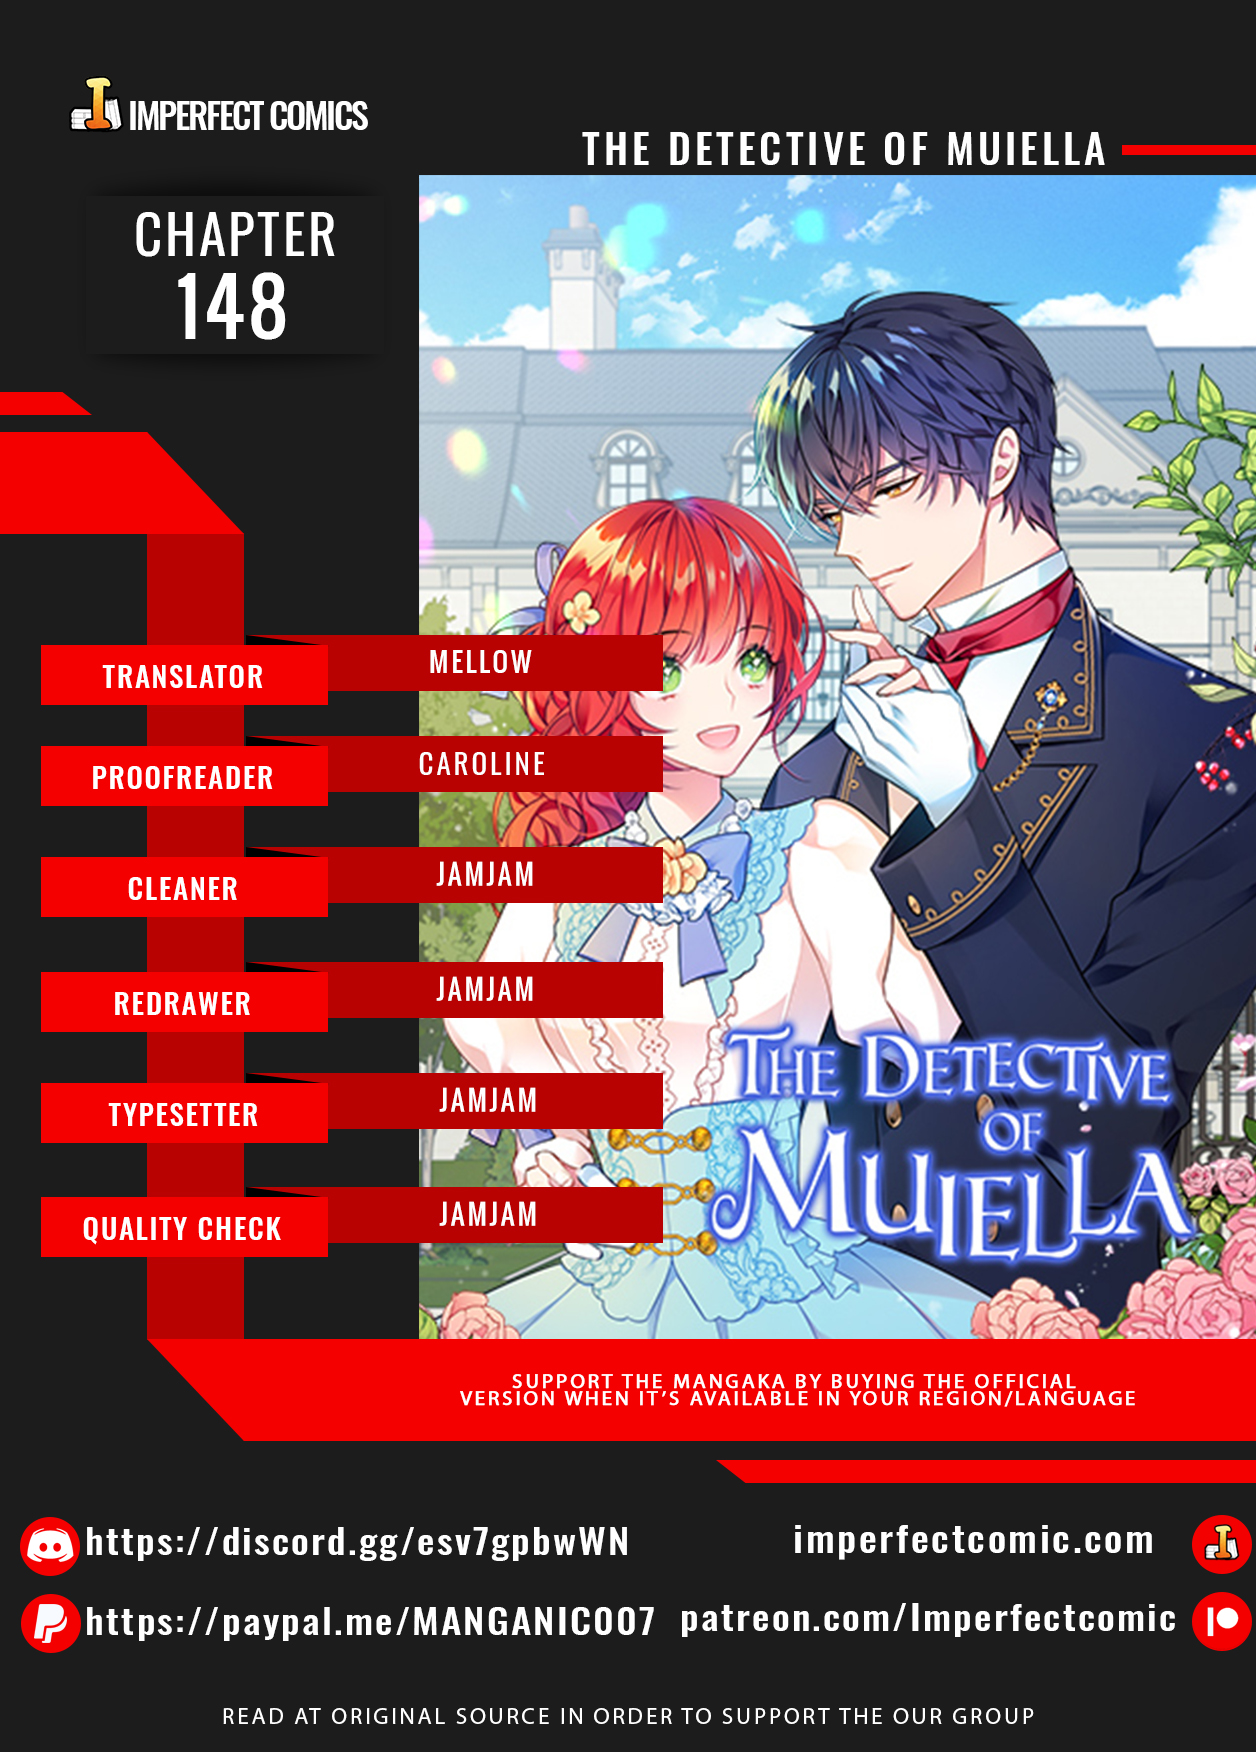 The Detective Of Muiella Chapter 148